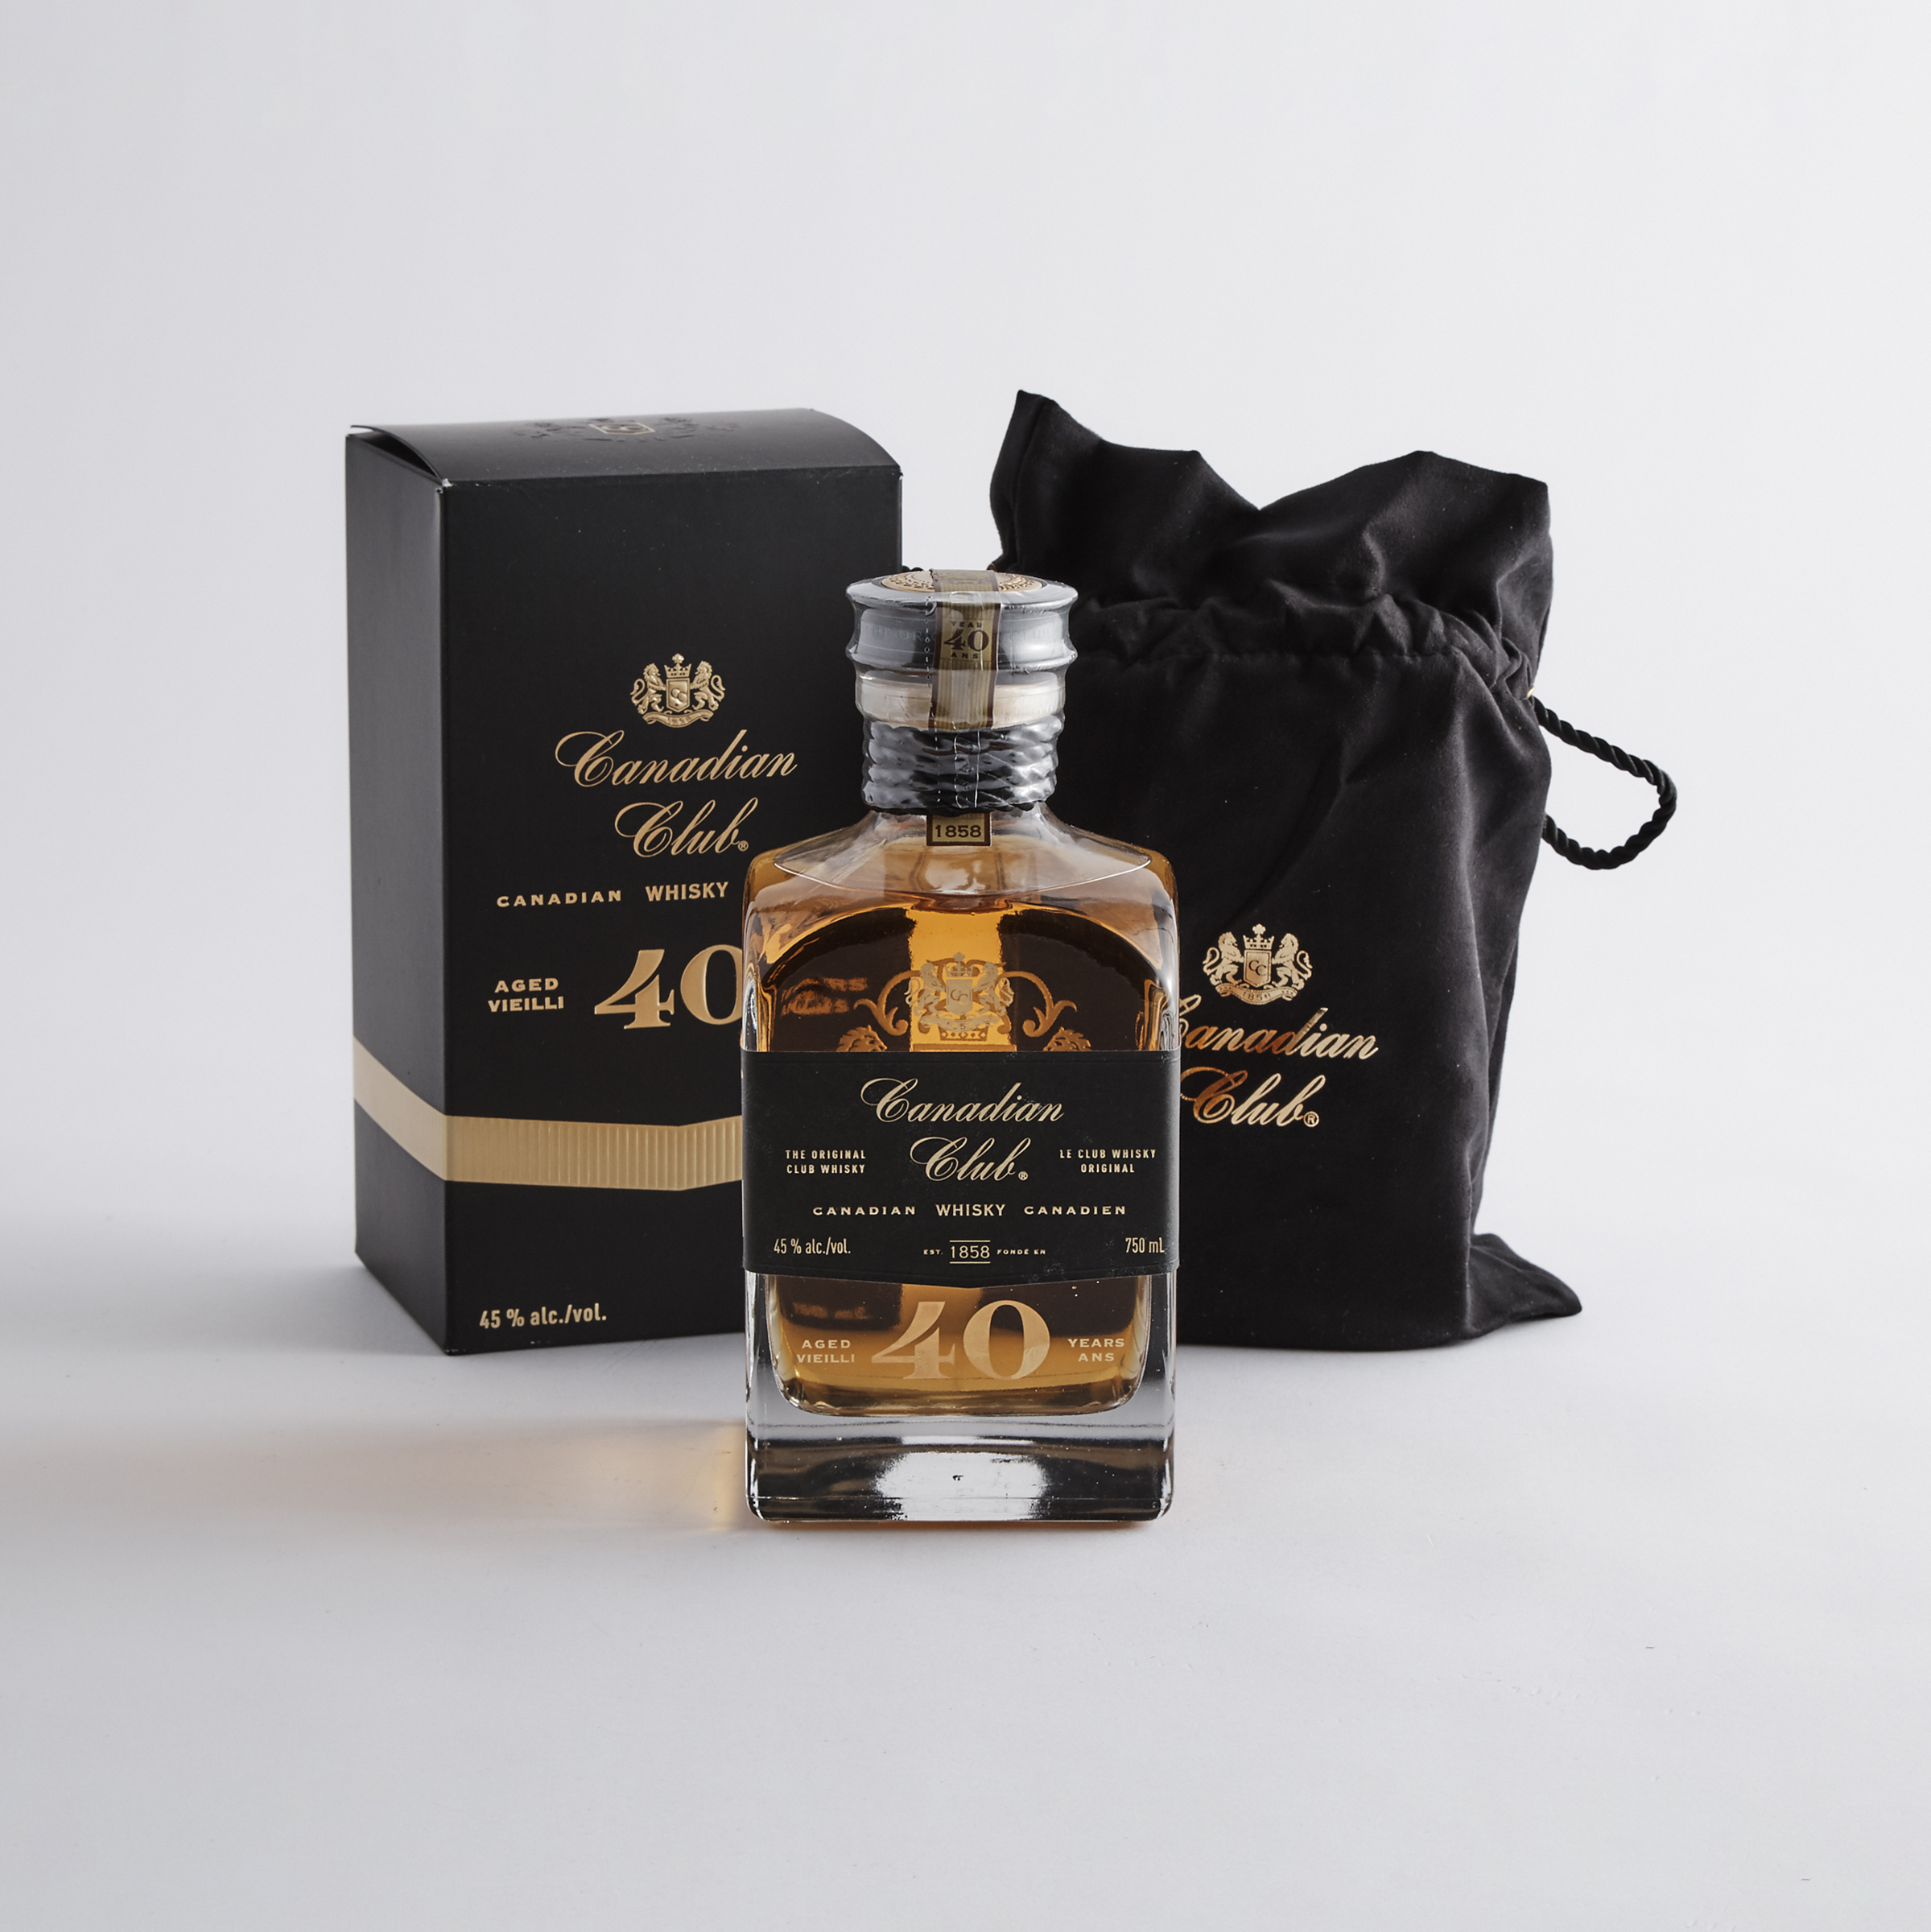 CANADIAN CLUB BLENDED CANADIAN WHISKY 40 YEARS (ONE 750 ML)